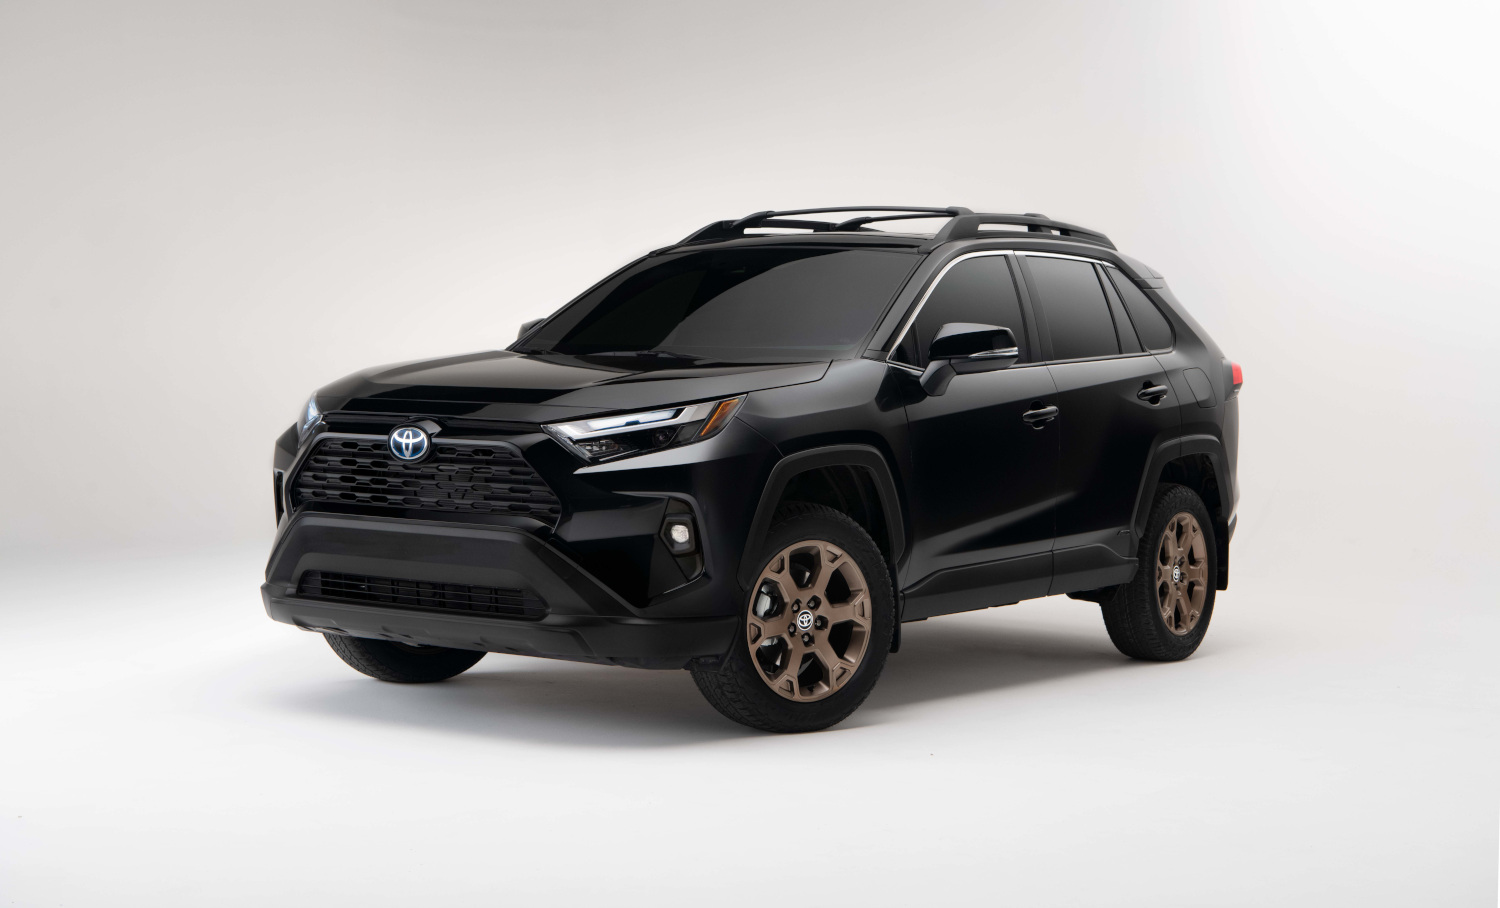 This 2023 RAV4 is one of the best Toyota SUVs under $40,000